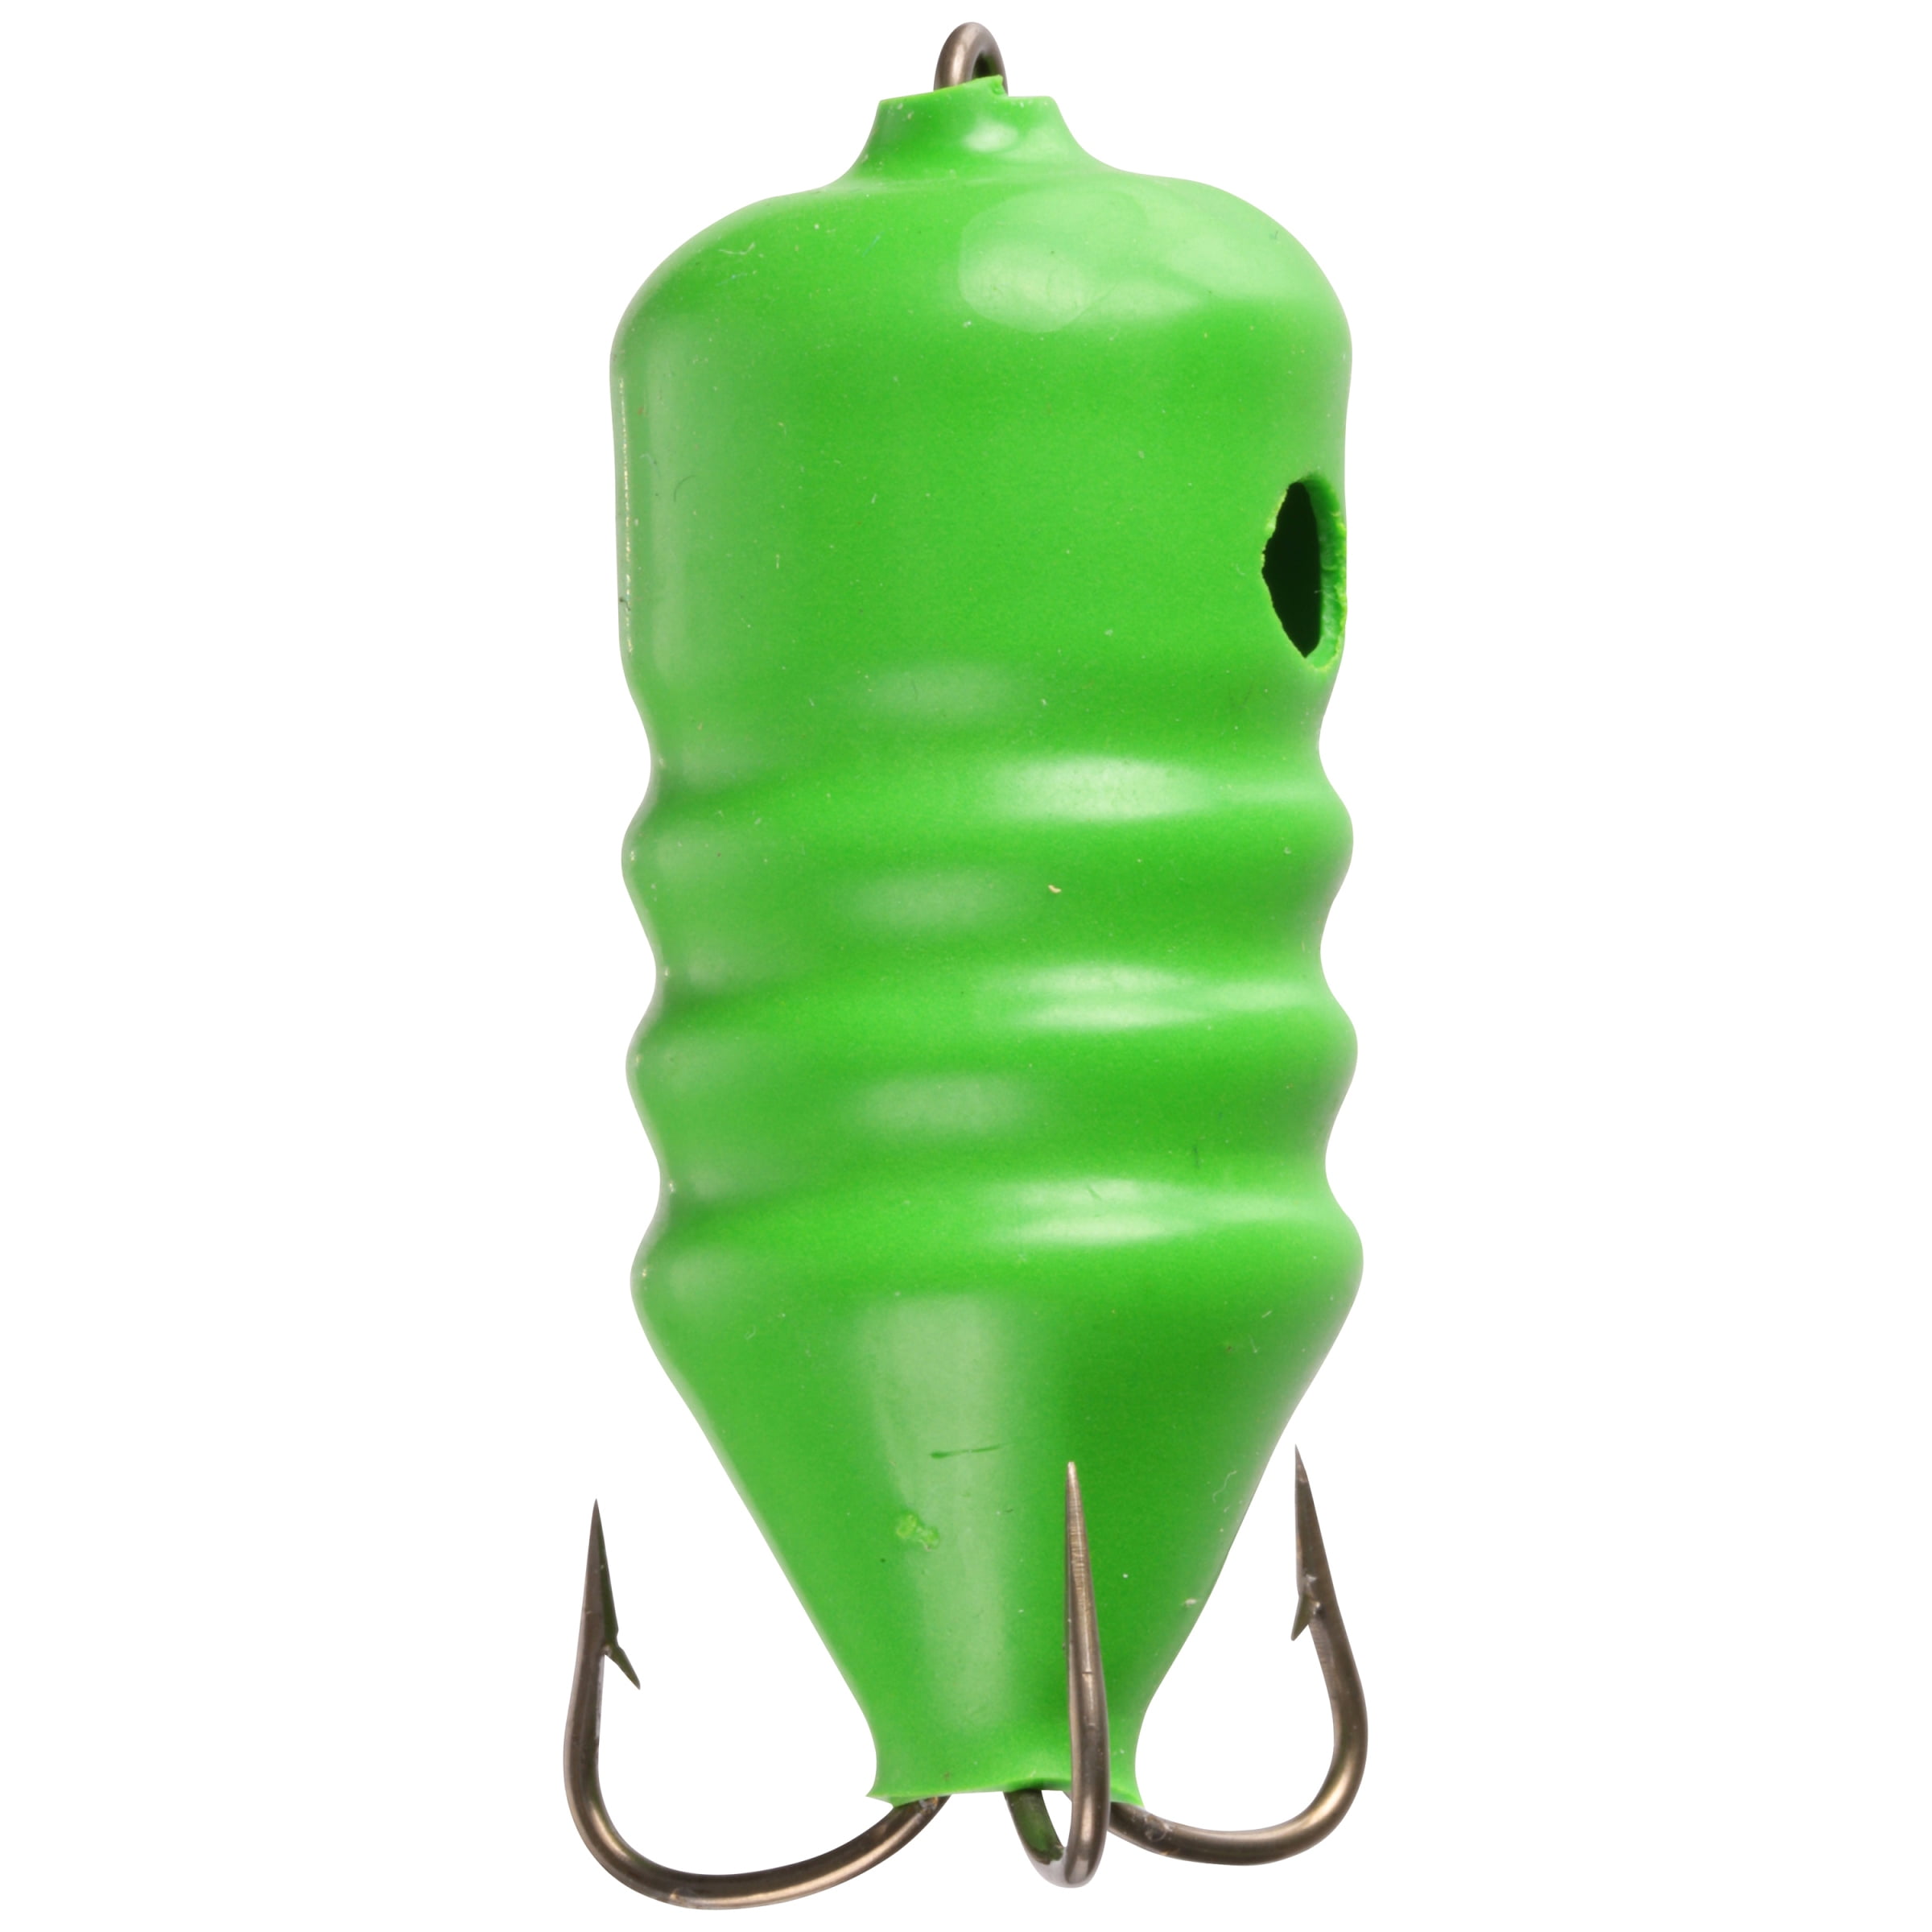 Details about   8 STH 3 1/2" Stumpy Crush Worms Scented Salted Soft Fishing Baits Whaaat 8220